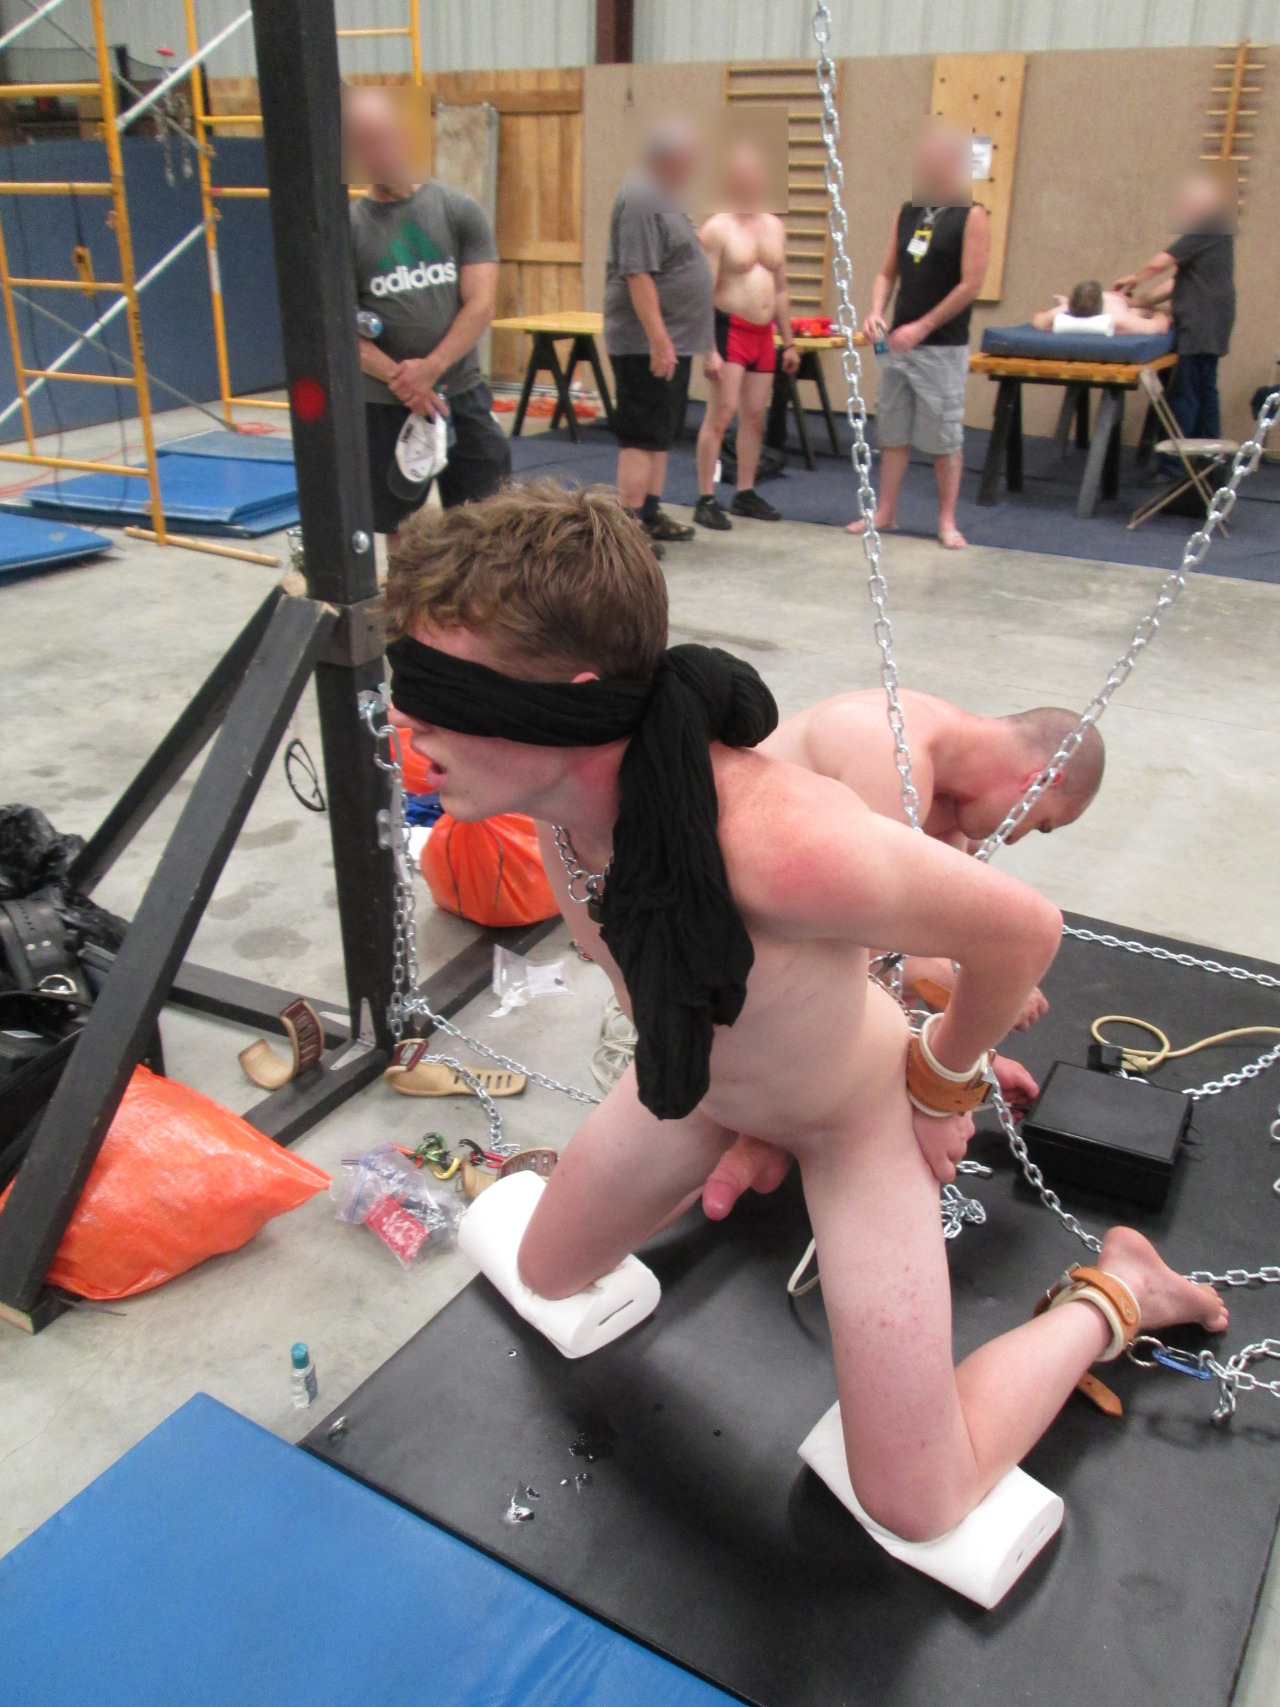 it was a great workshop, sorry should have told him it was a dungeon play party&hellip;.